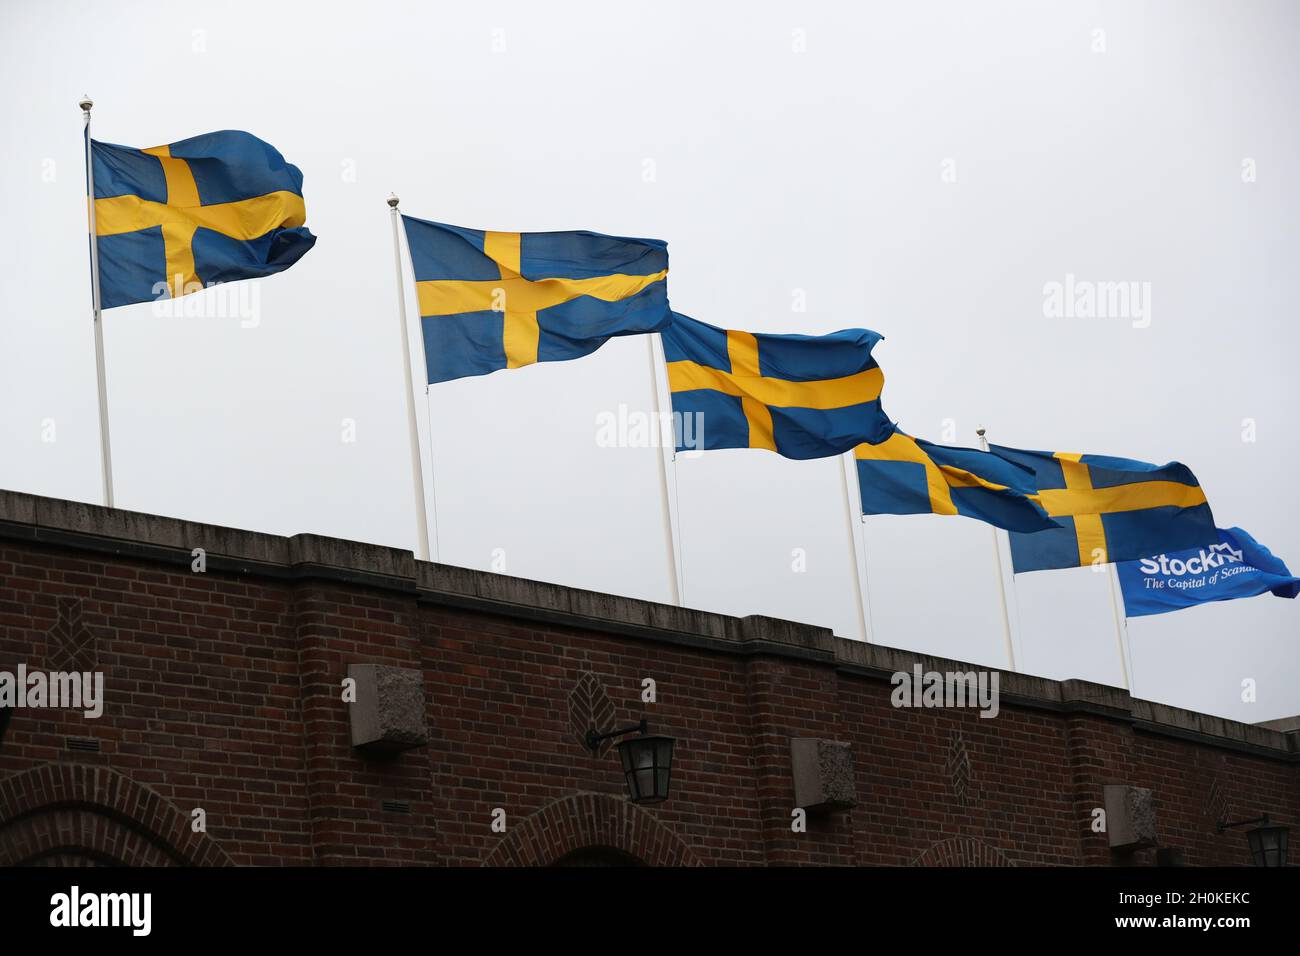 Swedish flags at Stockholm stadion during the 42nd edition of the ASICS  Stockholm Marathon. One week before the race, 12,018 had registered for the  race, of which 3,405 were women. This year,